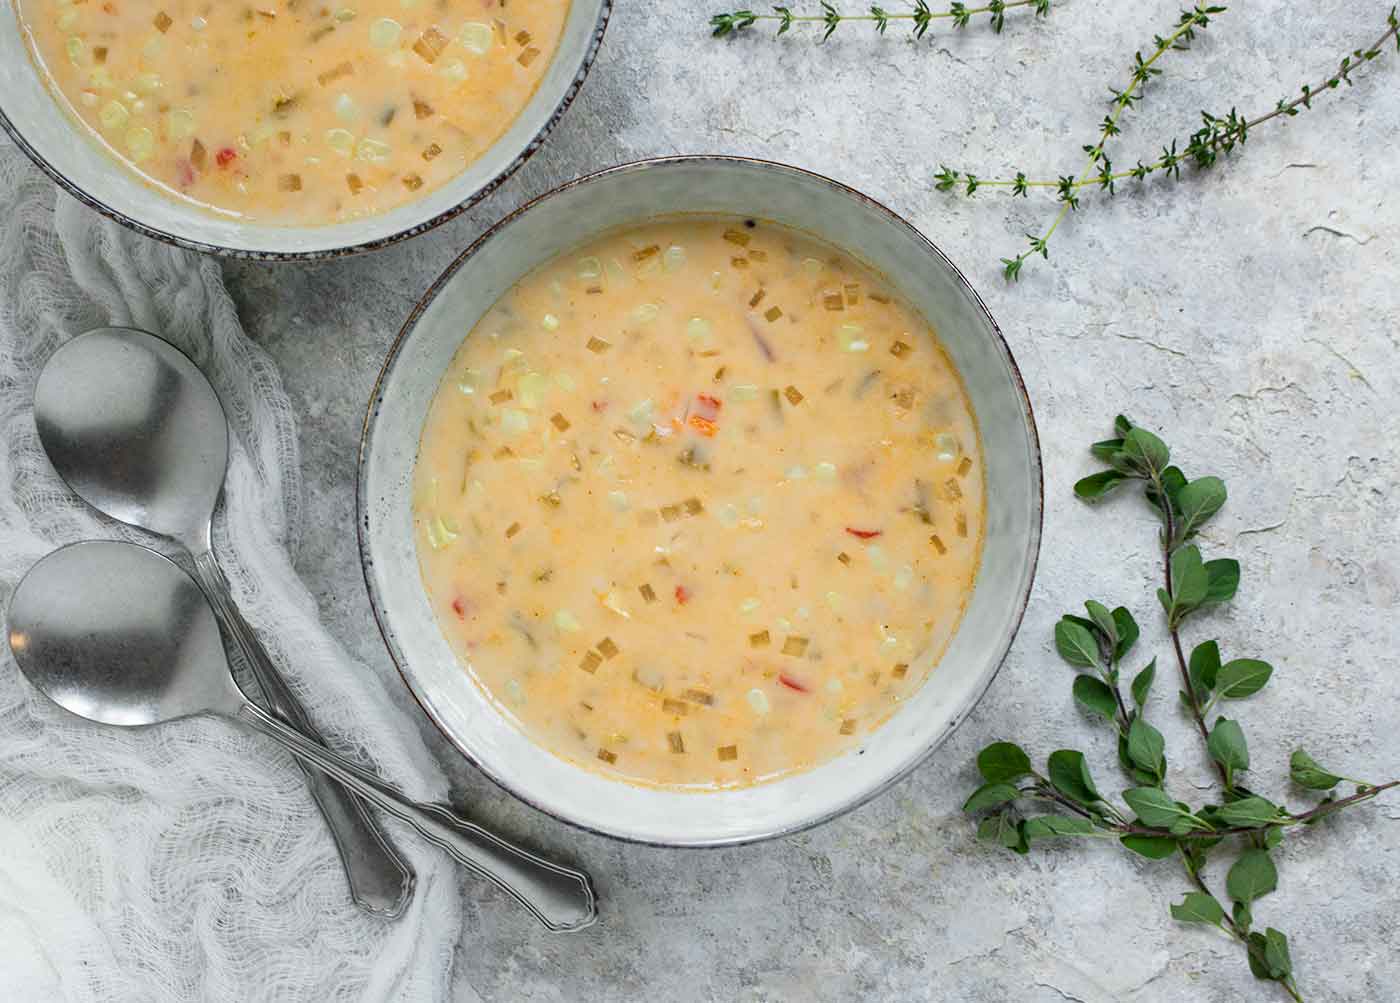 Smoky hatch chile corn chowder in a bowl, ready to eat